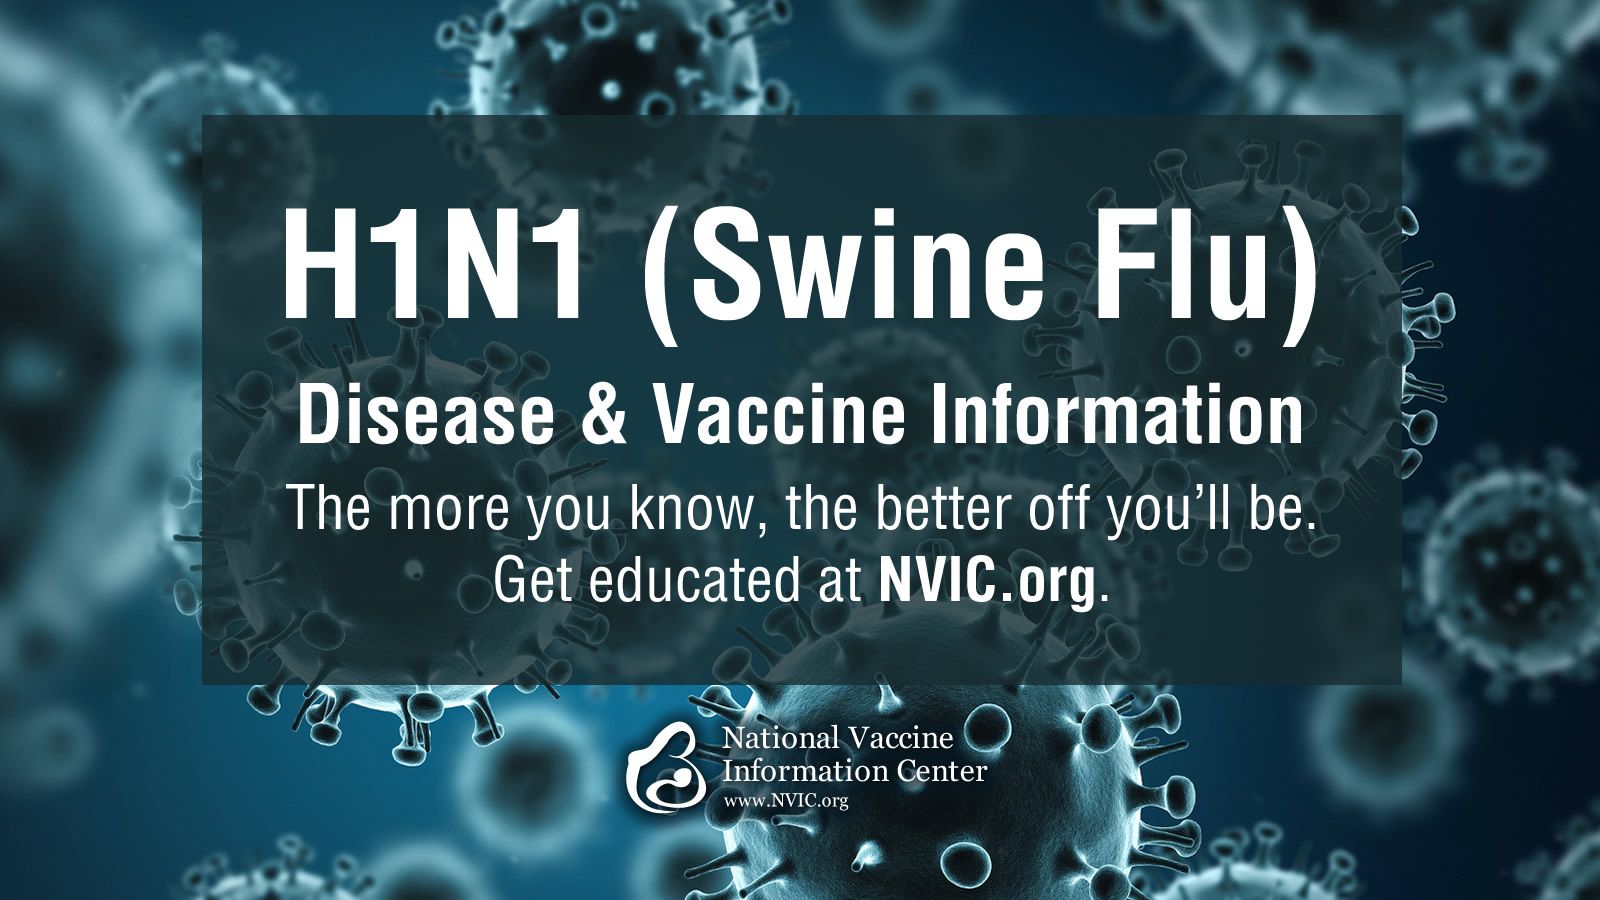 Pandemic H1N1 Swine Flu: What About You & Your Family?